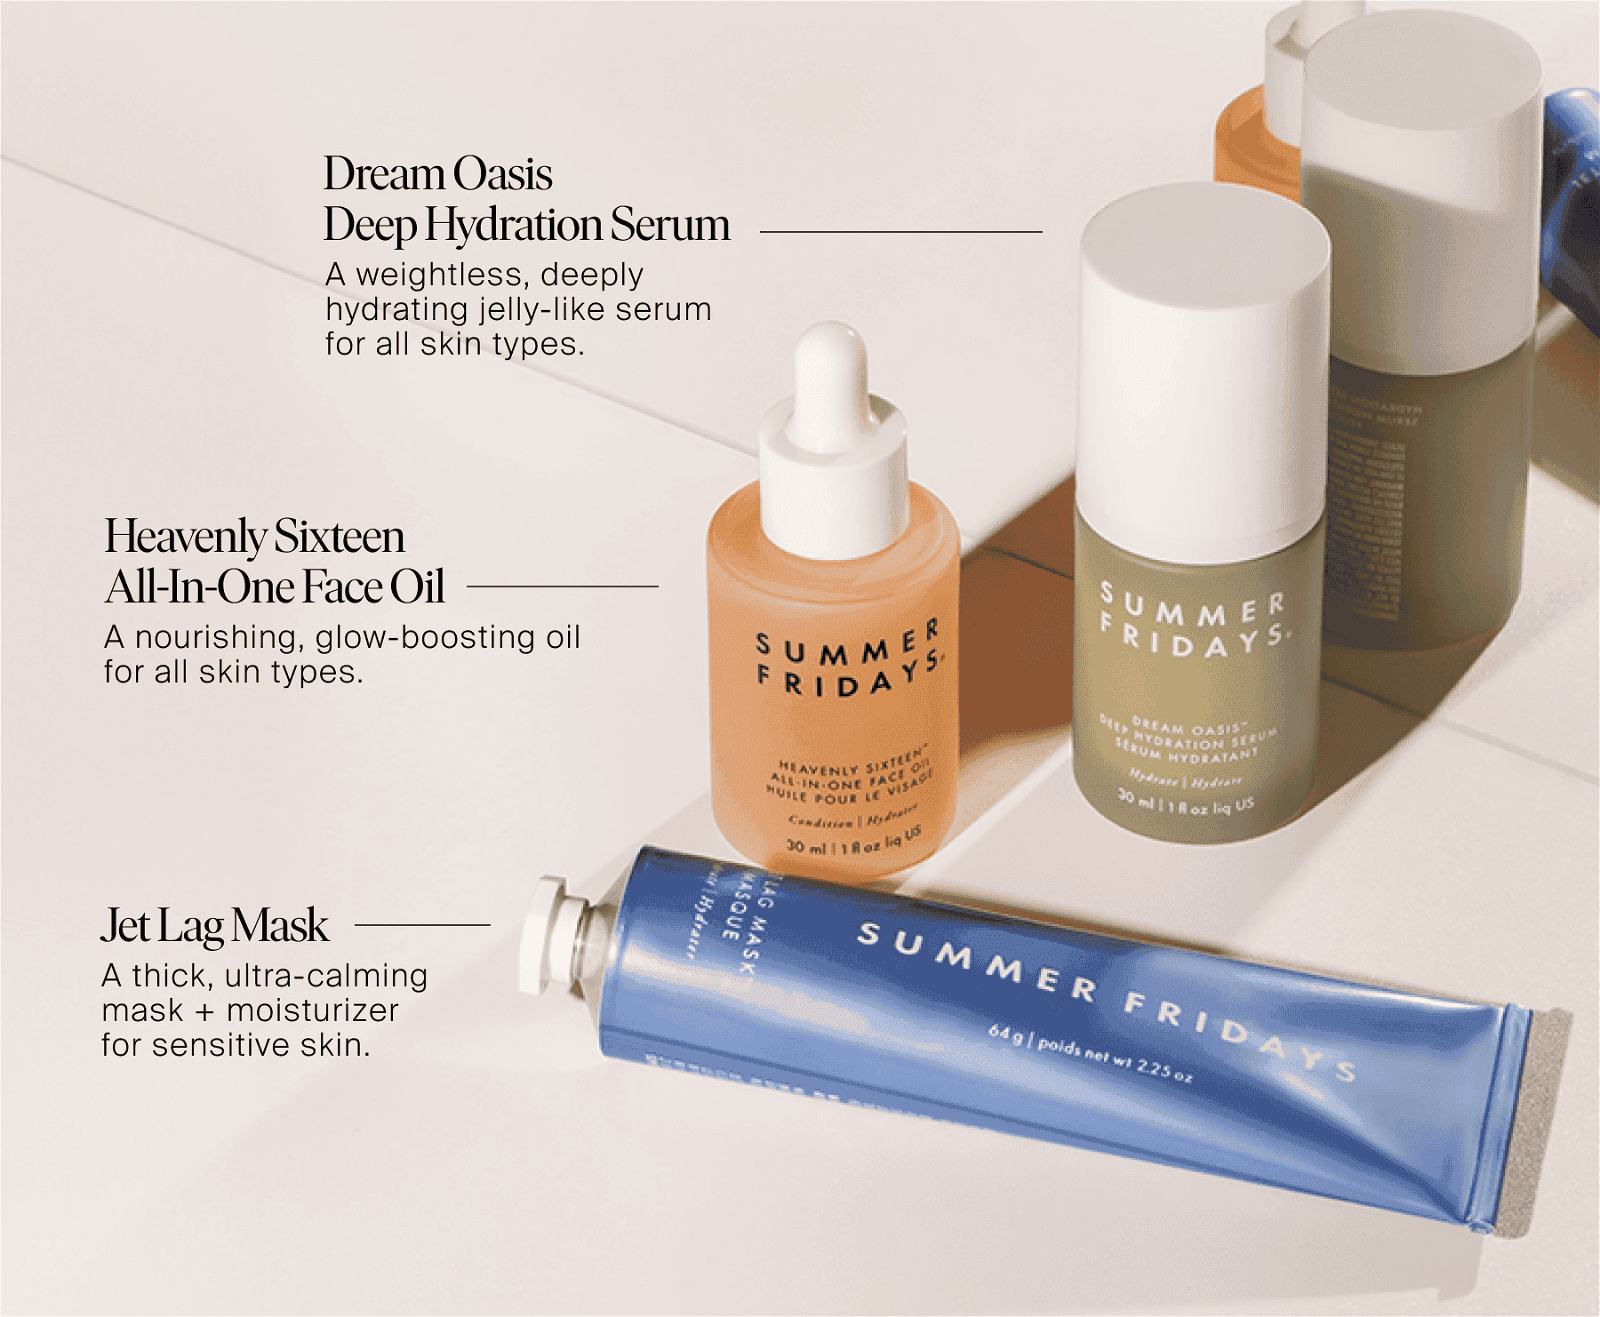 Dream Oasis Deep Hydration Serum, Heavenly Sixteen All-In-One Face Oil and Jet Lag Mask